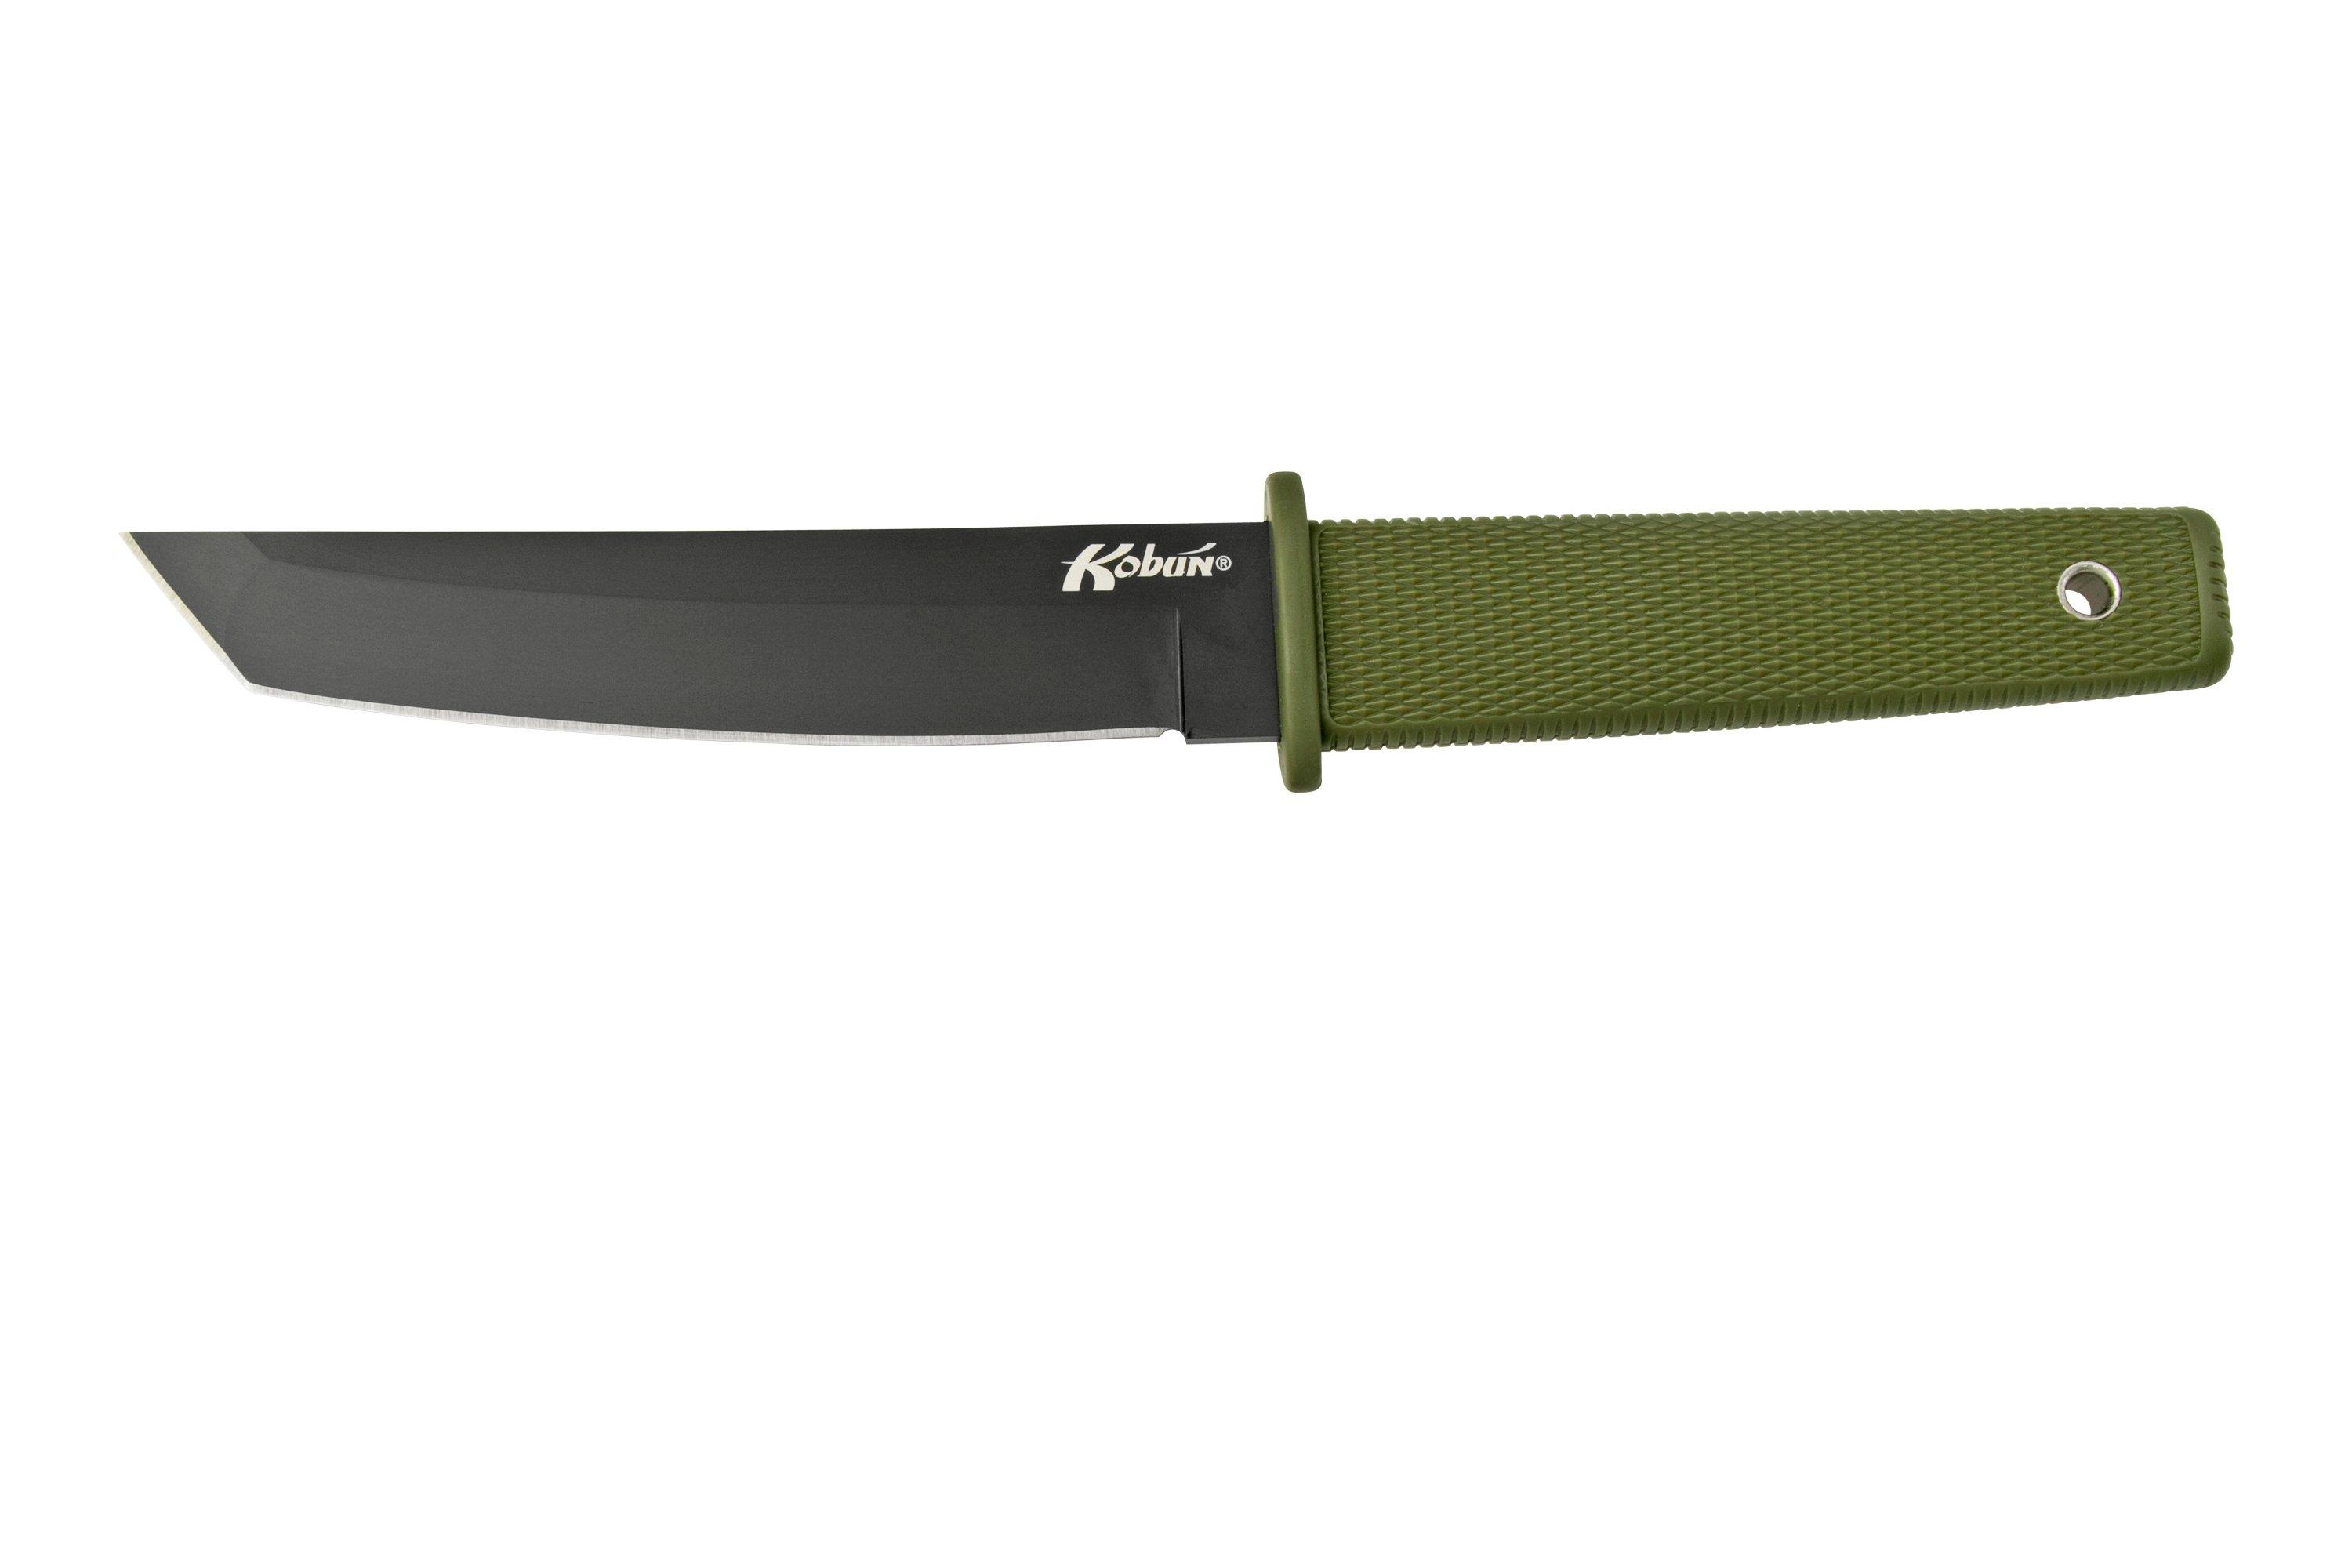  Cold Steel Leatherneck-SF, One Size : Automotive